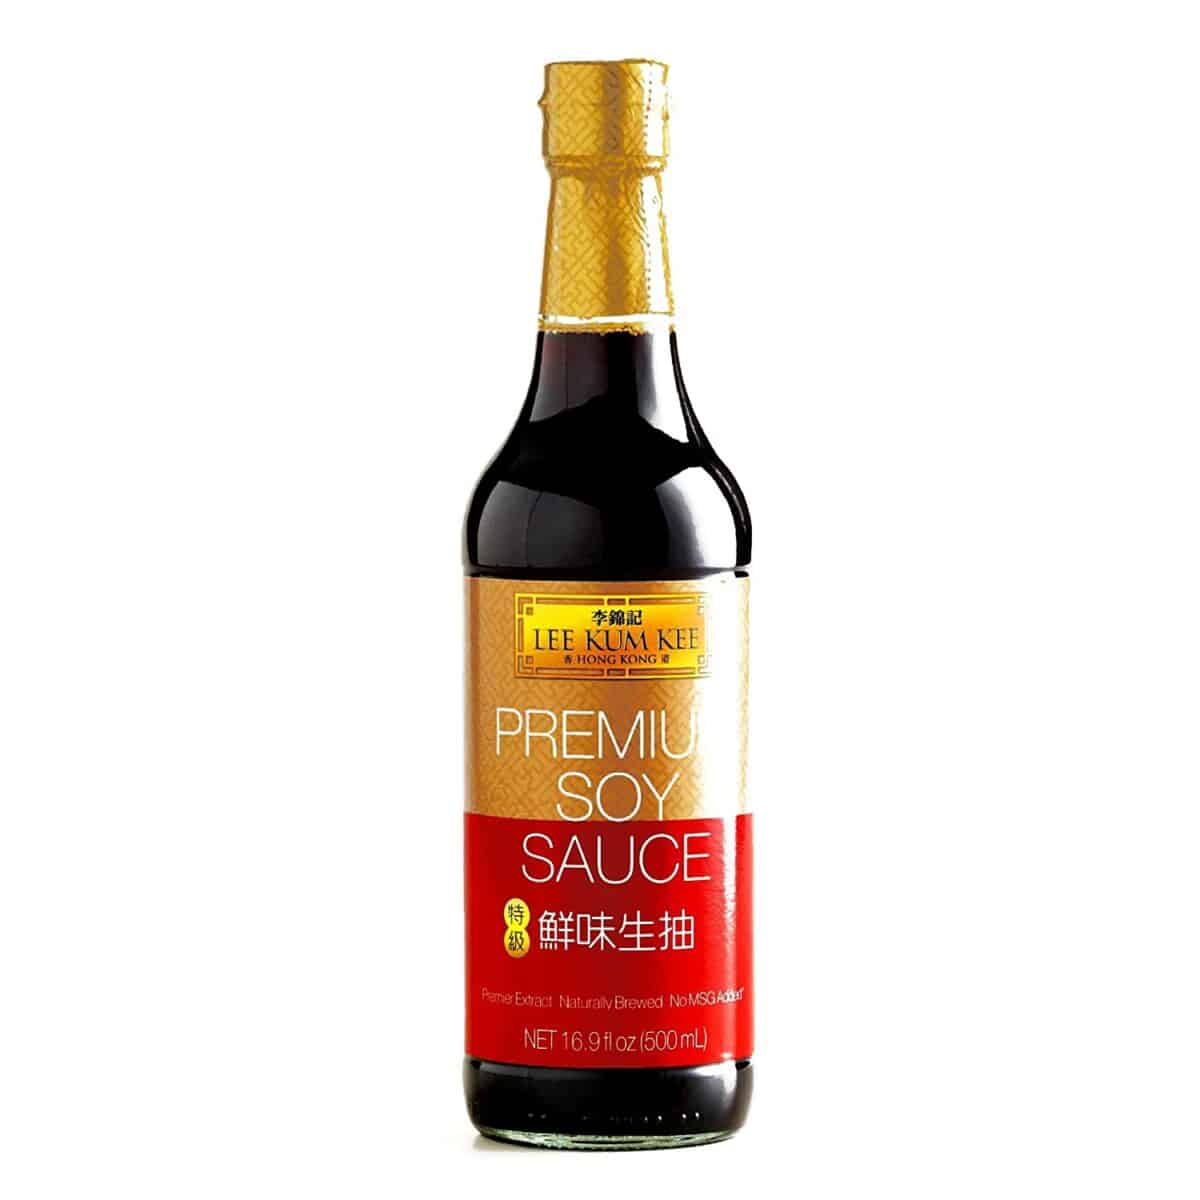 Best soy sauce for stir-fry & fried rice- Lee Kum Kee Premium Soy Sauce